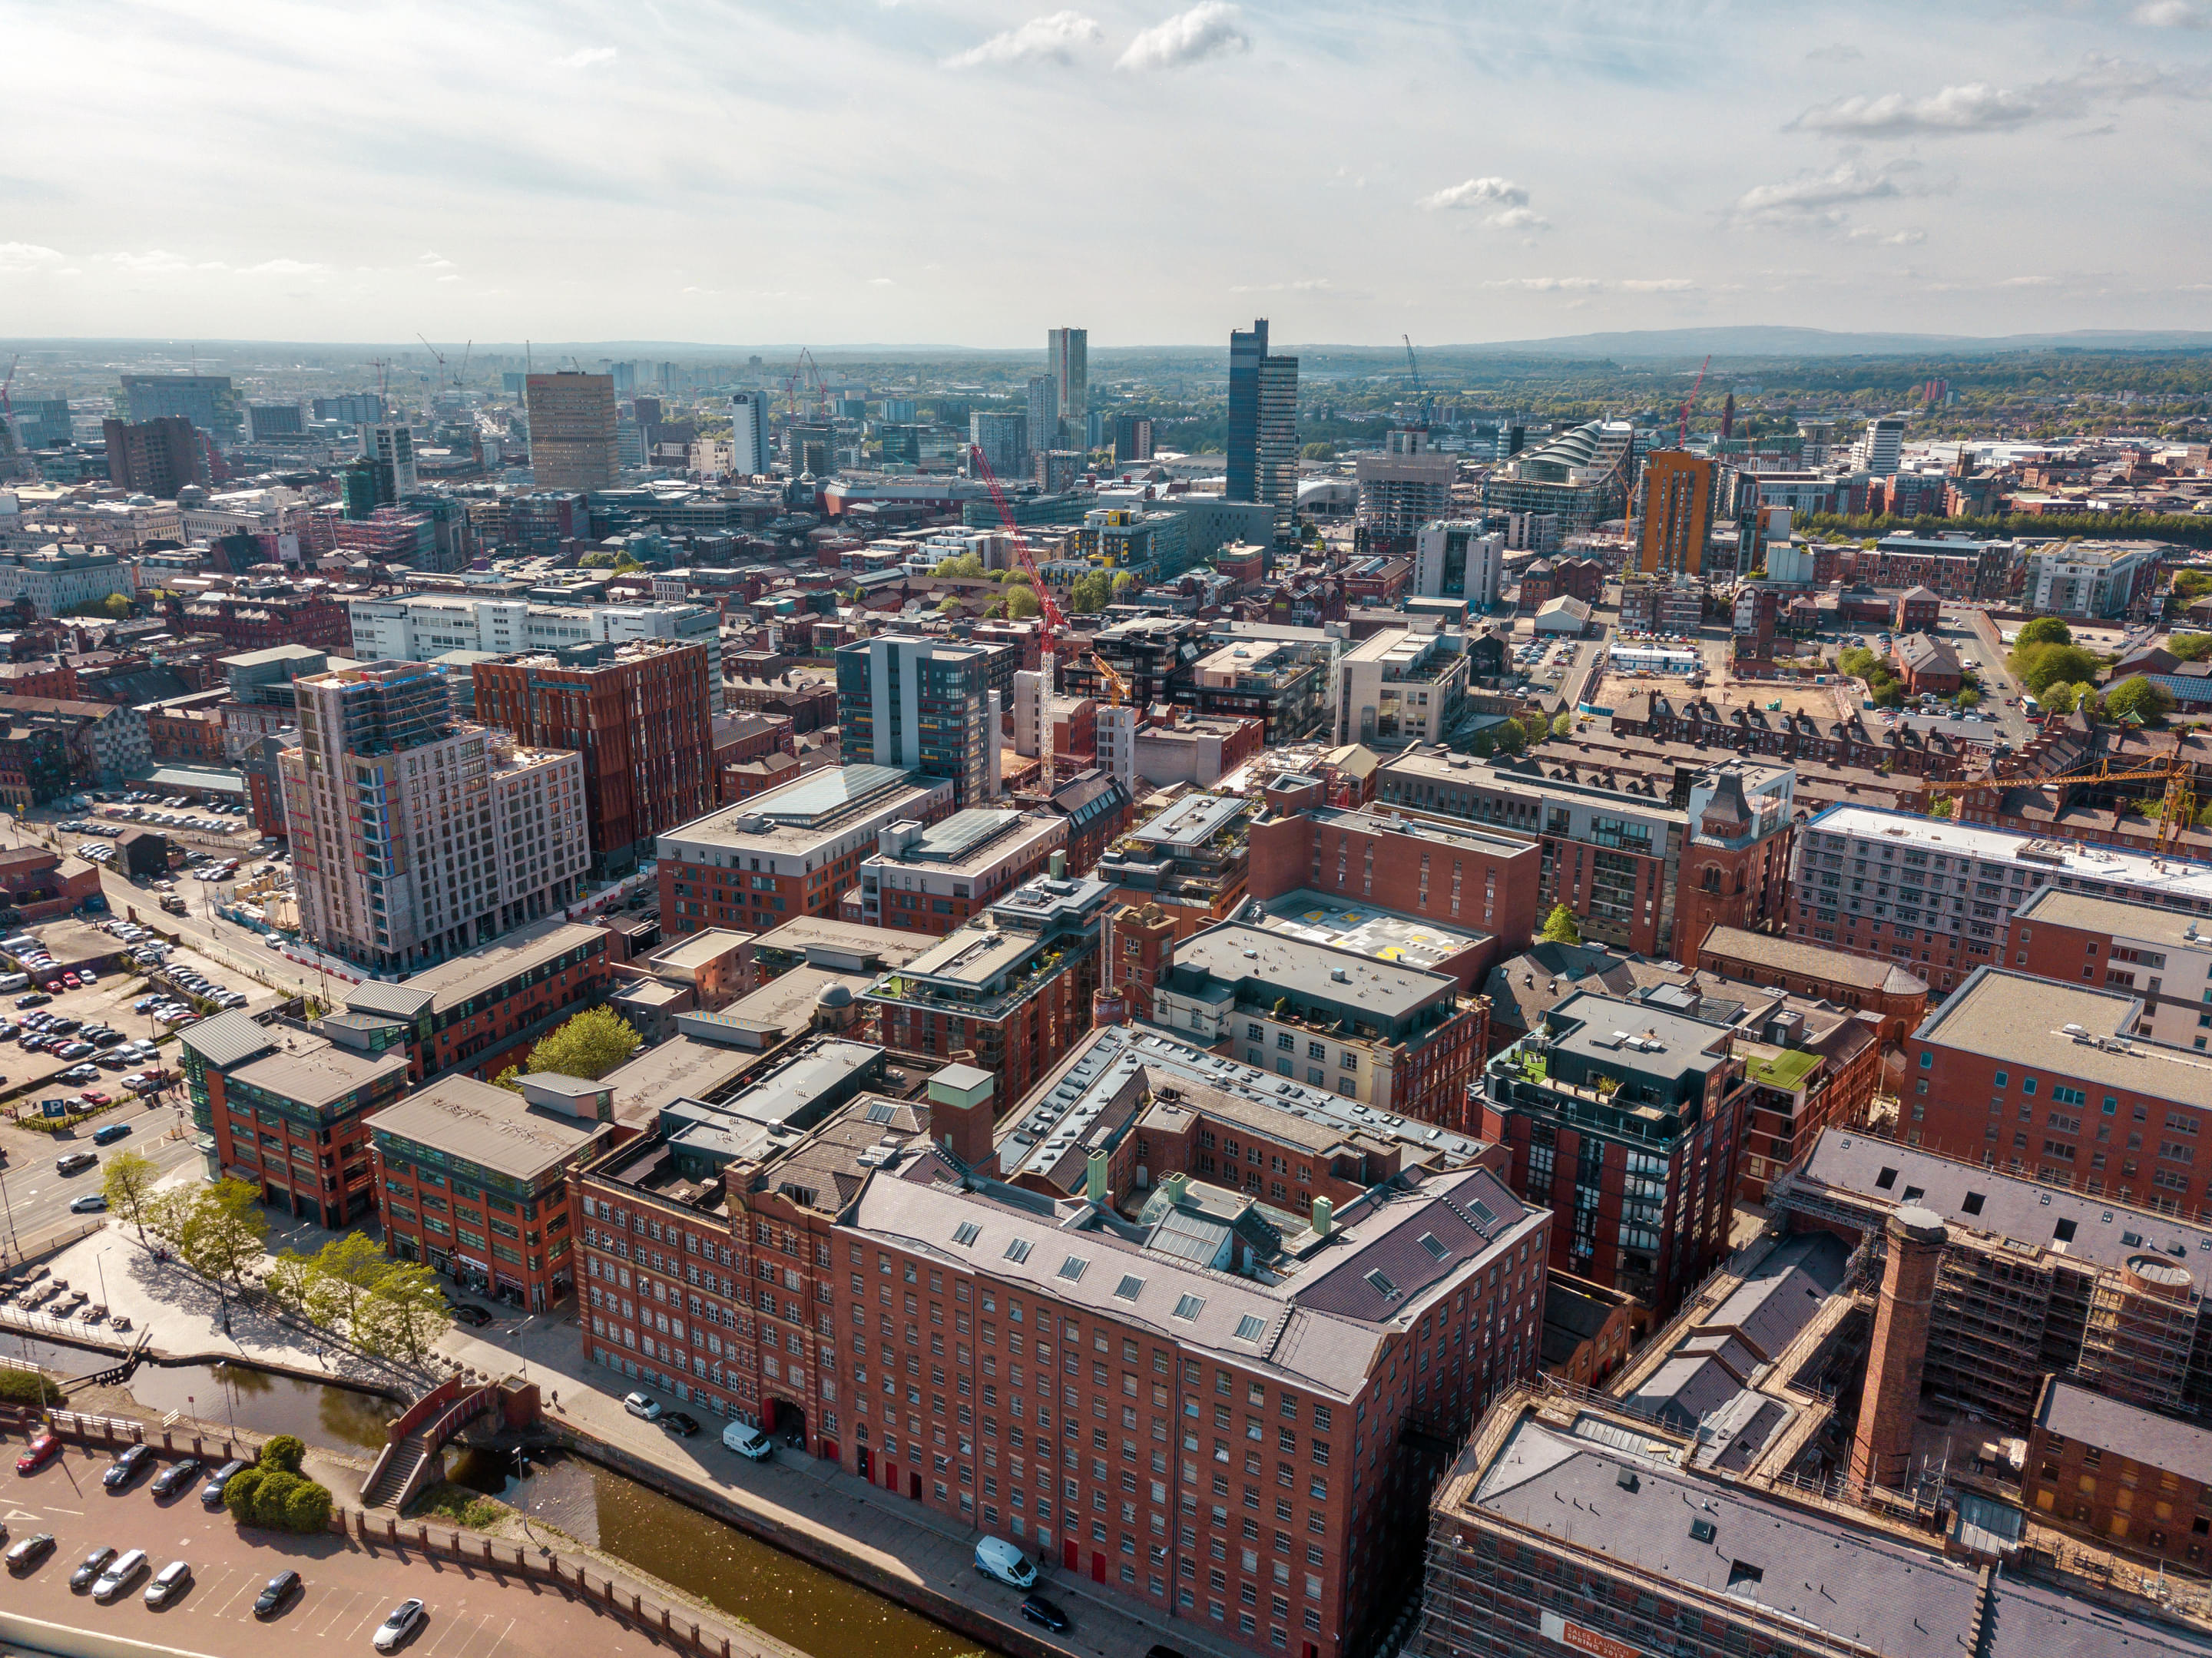 Ancoats Overview